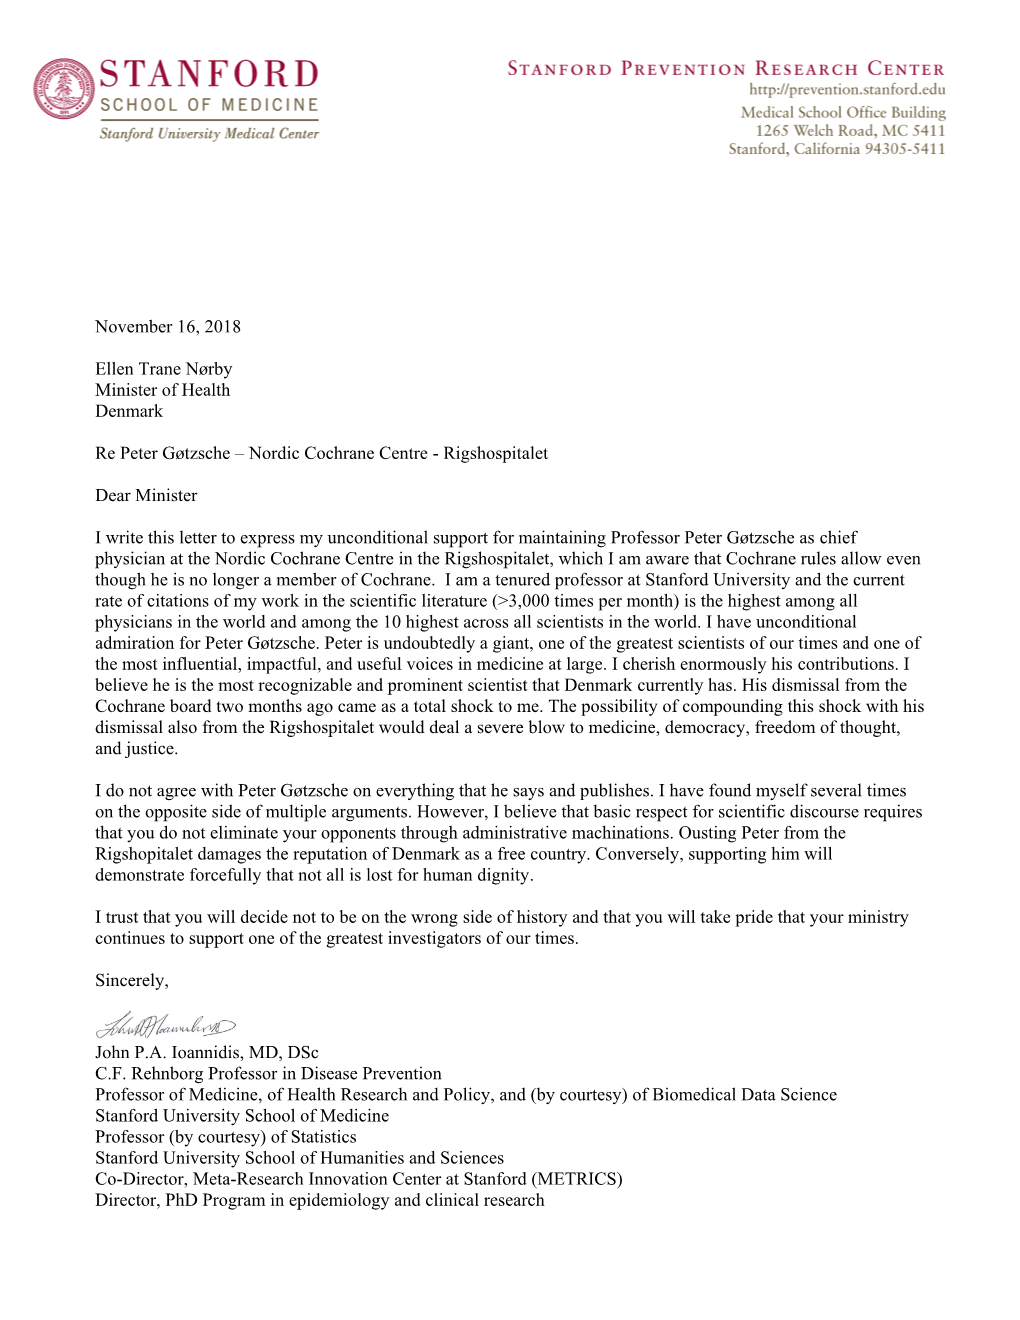 Letter from John Ioannidis to the Danish Minister Of